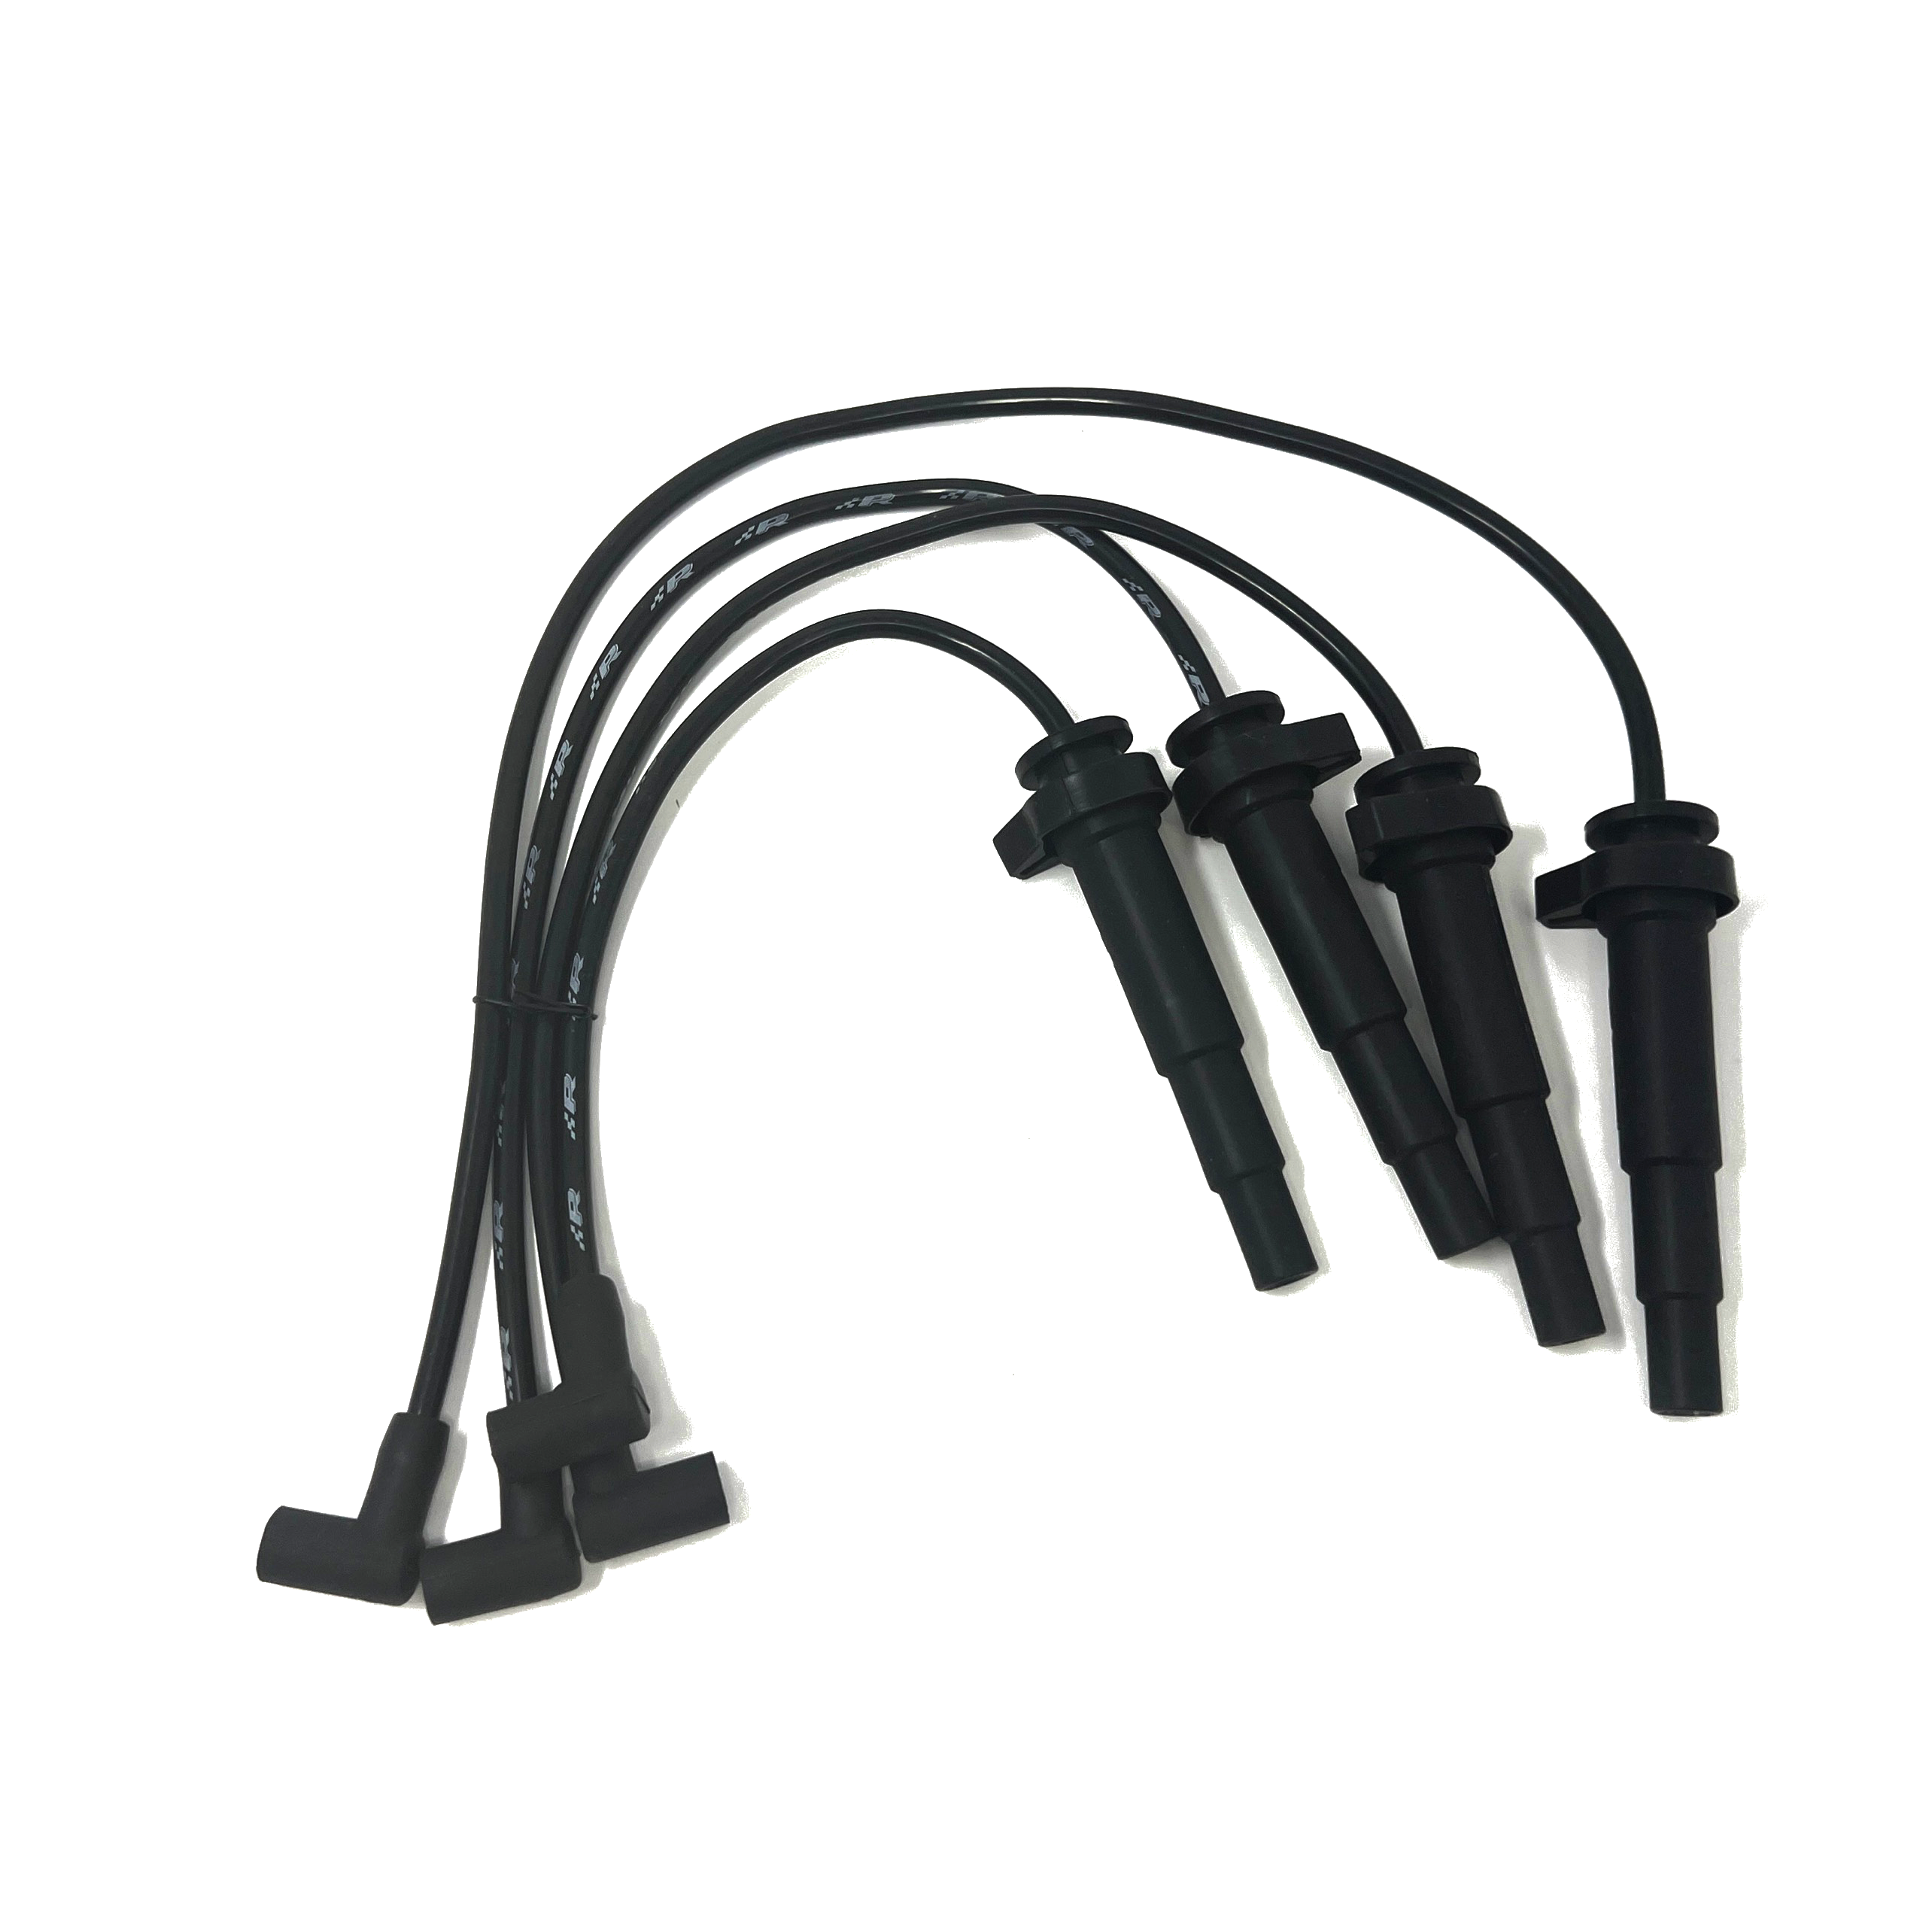 BMW N20 Replacement Spark Plug Wires (4pk) - 0